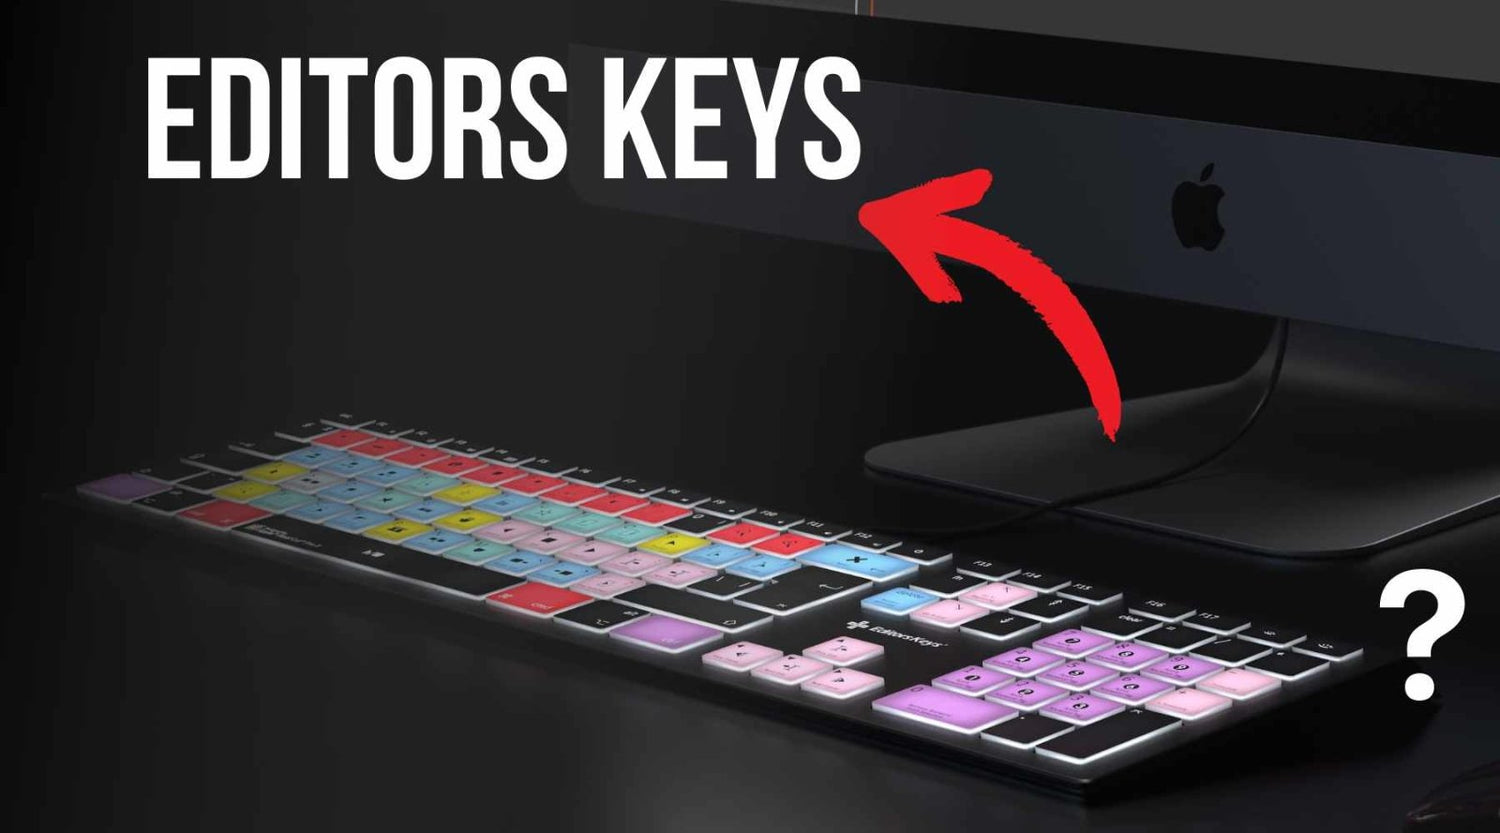 Editors Keys: The Ultimate Shortcut Keyboards and Keyboard Covers for Video, Audio, and Design Professionals - Editors Keys